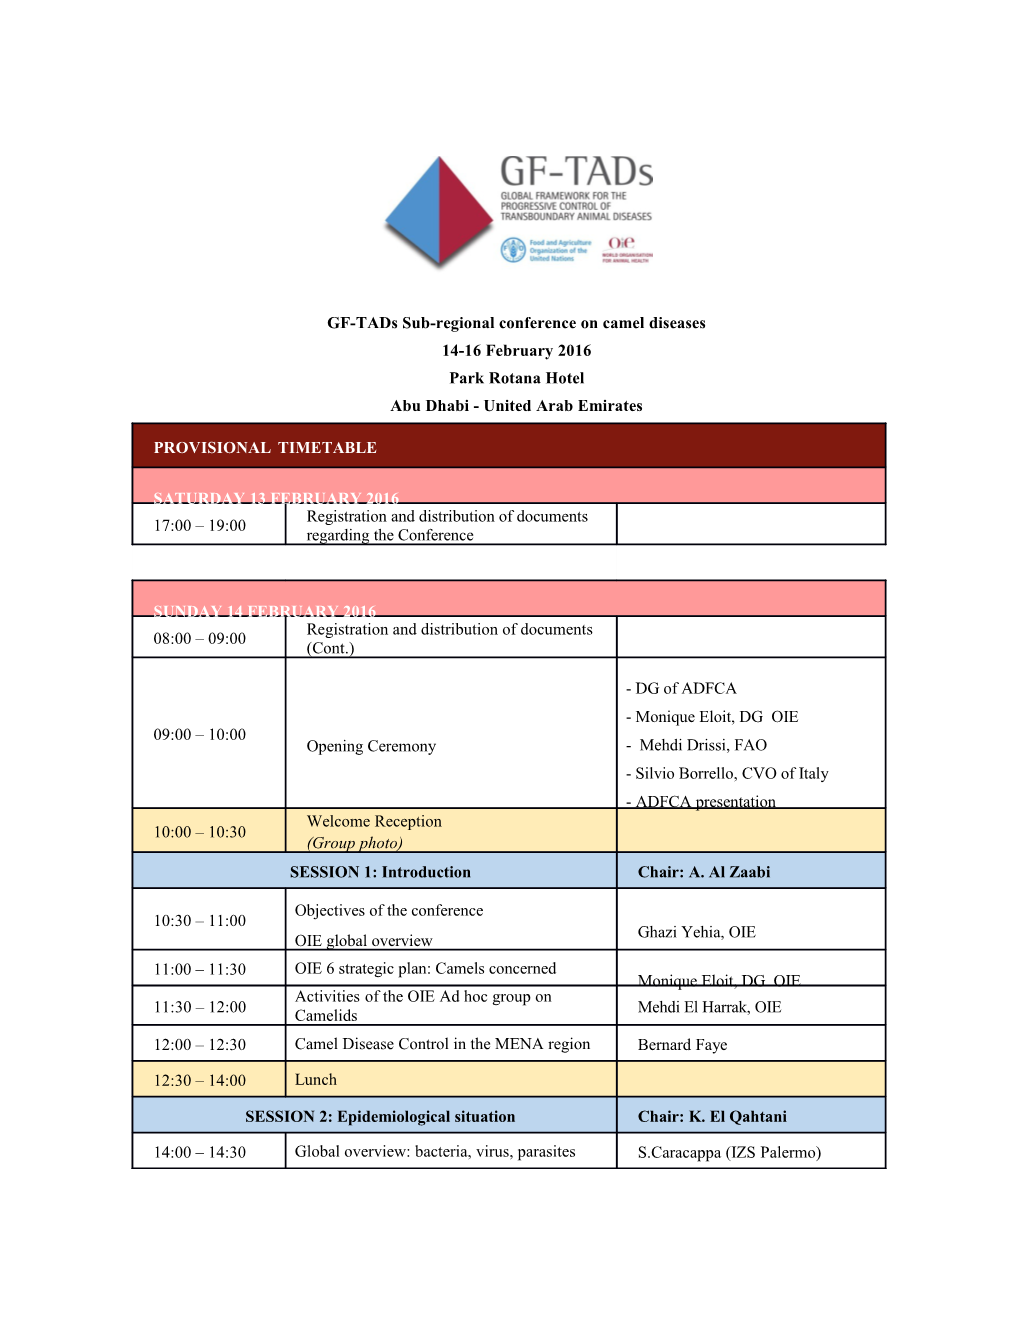 GF-Tads Sub-Regional Conference on Camel Diseases